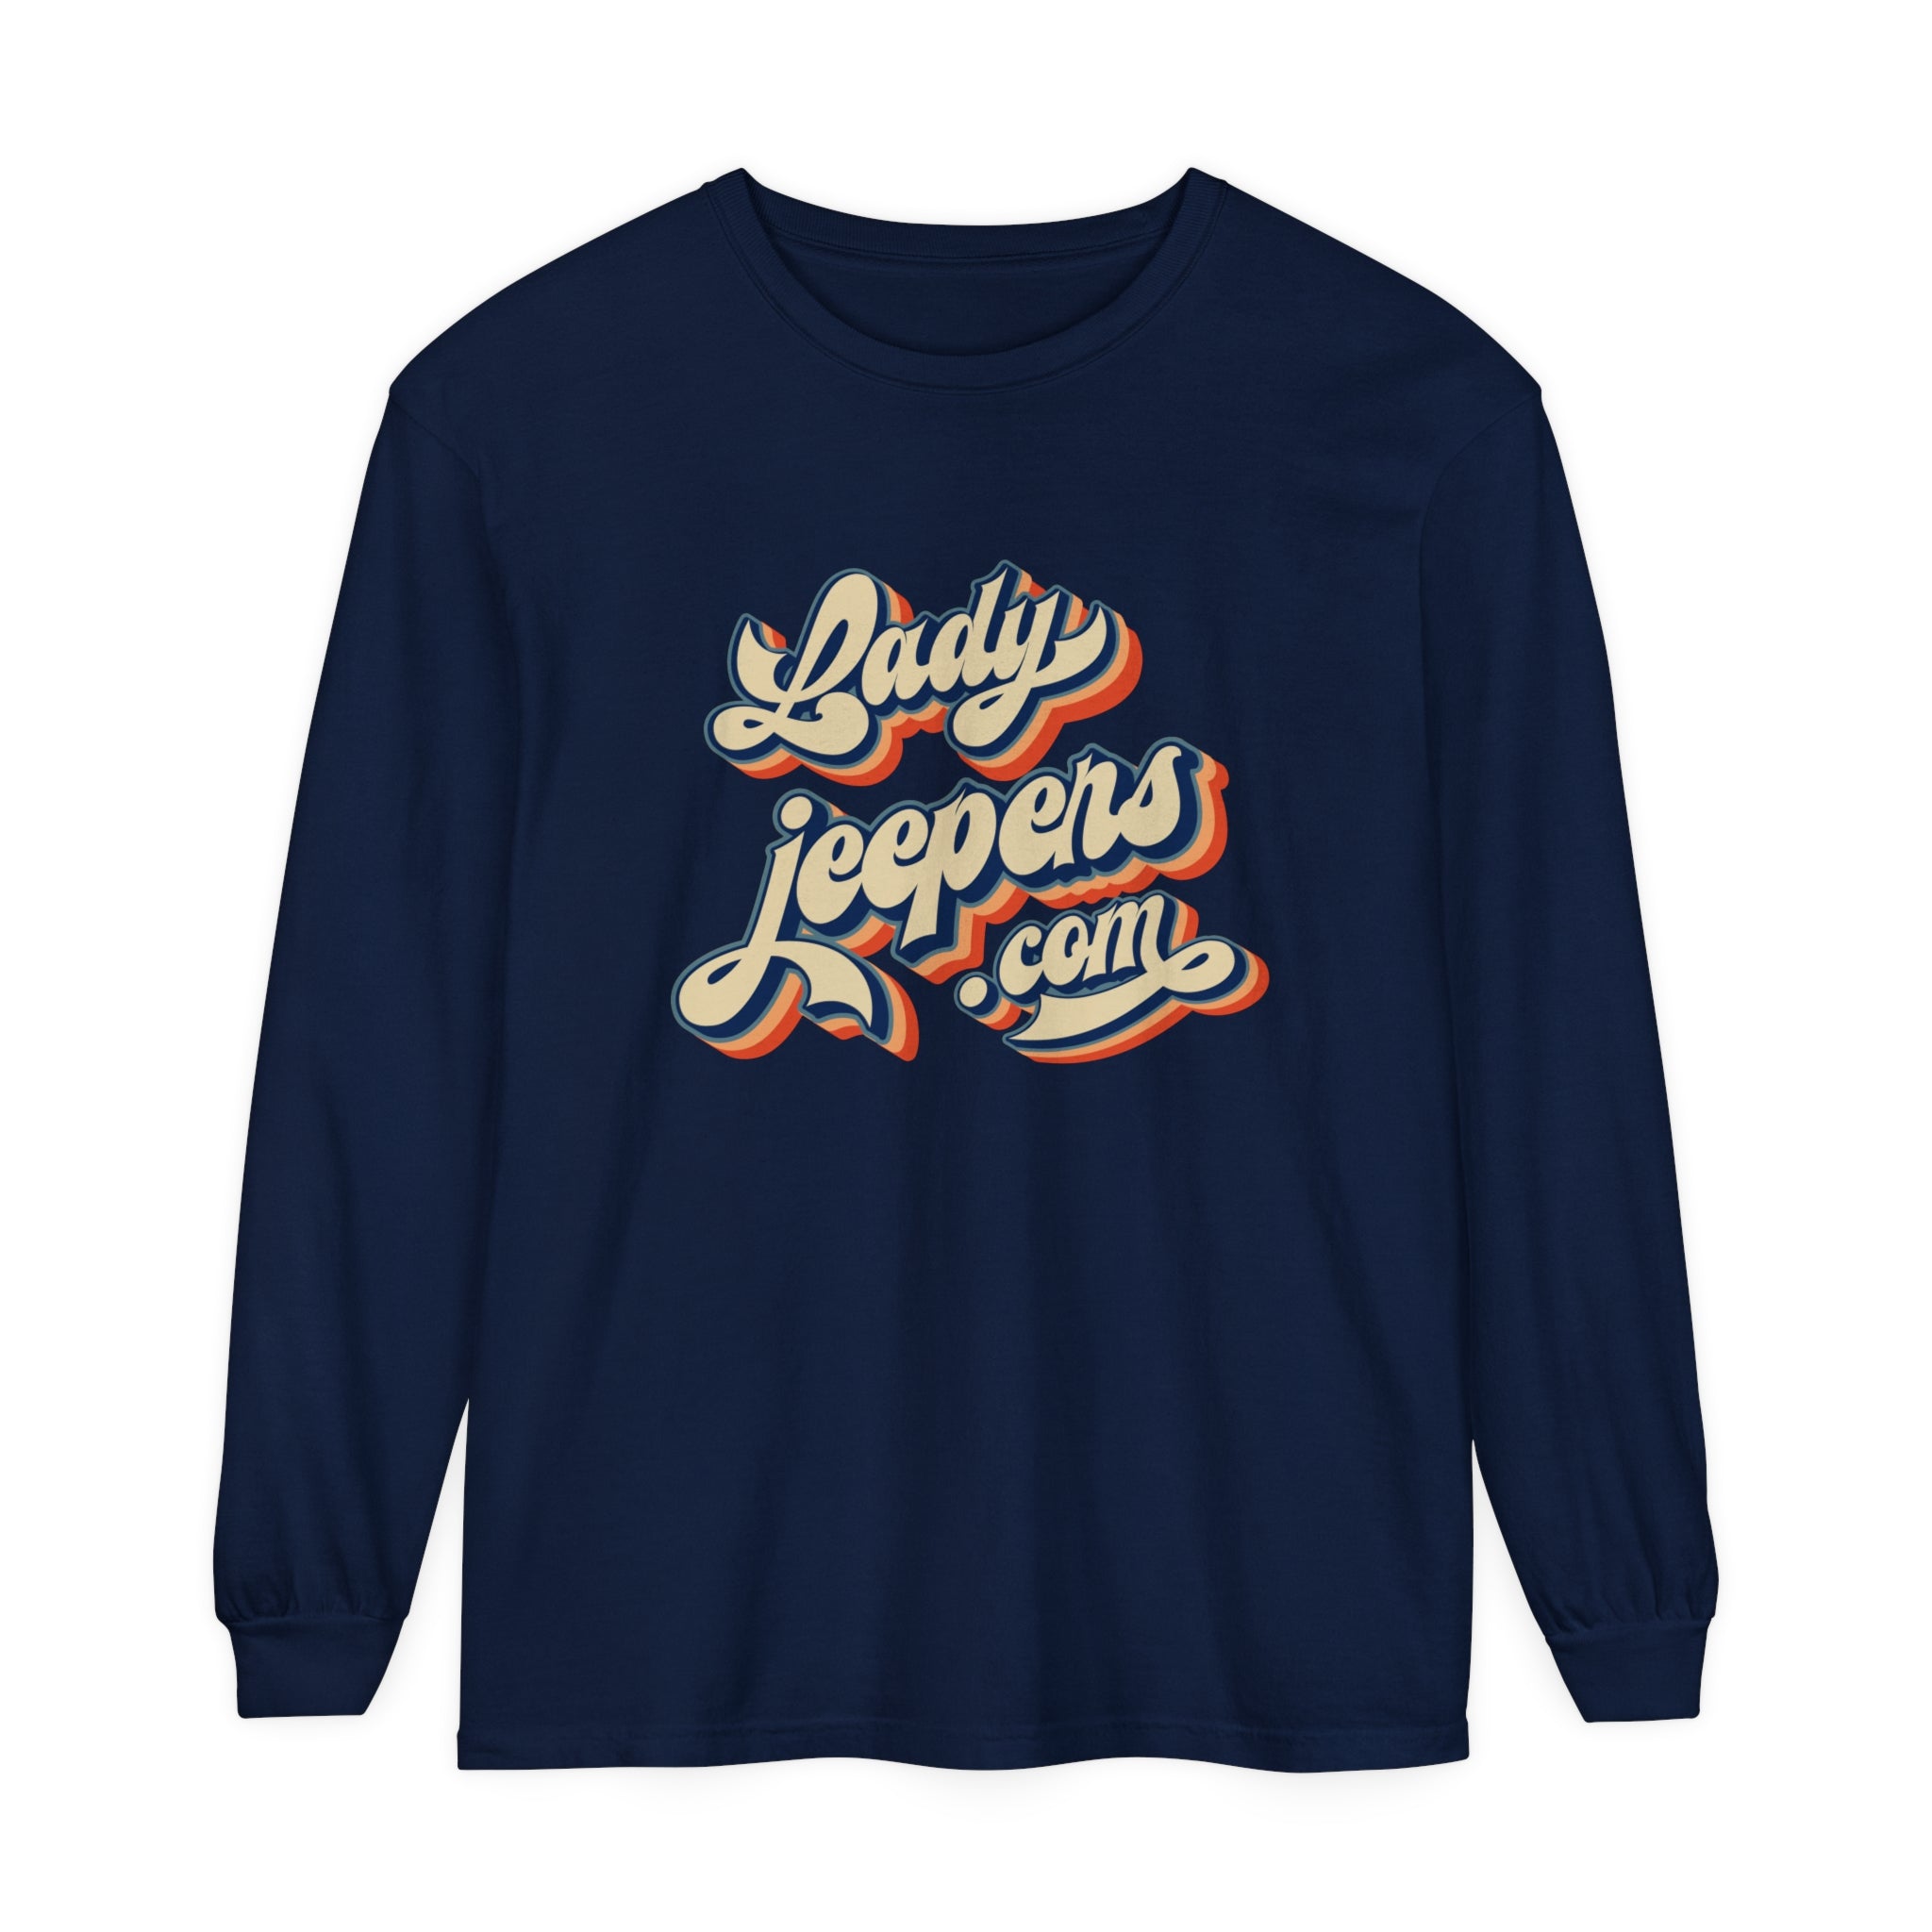 Retro LadyJeepers.com Comfort Colors Long Sleeve T-Shirt